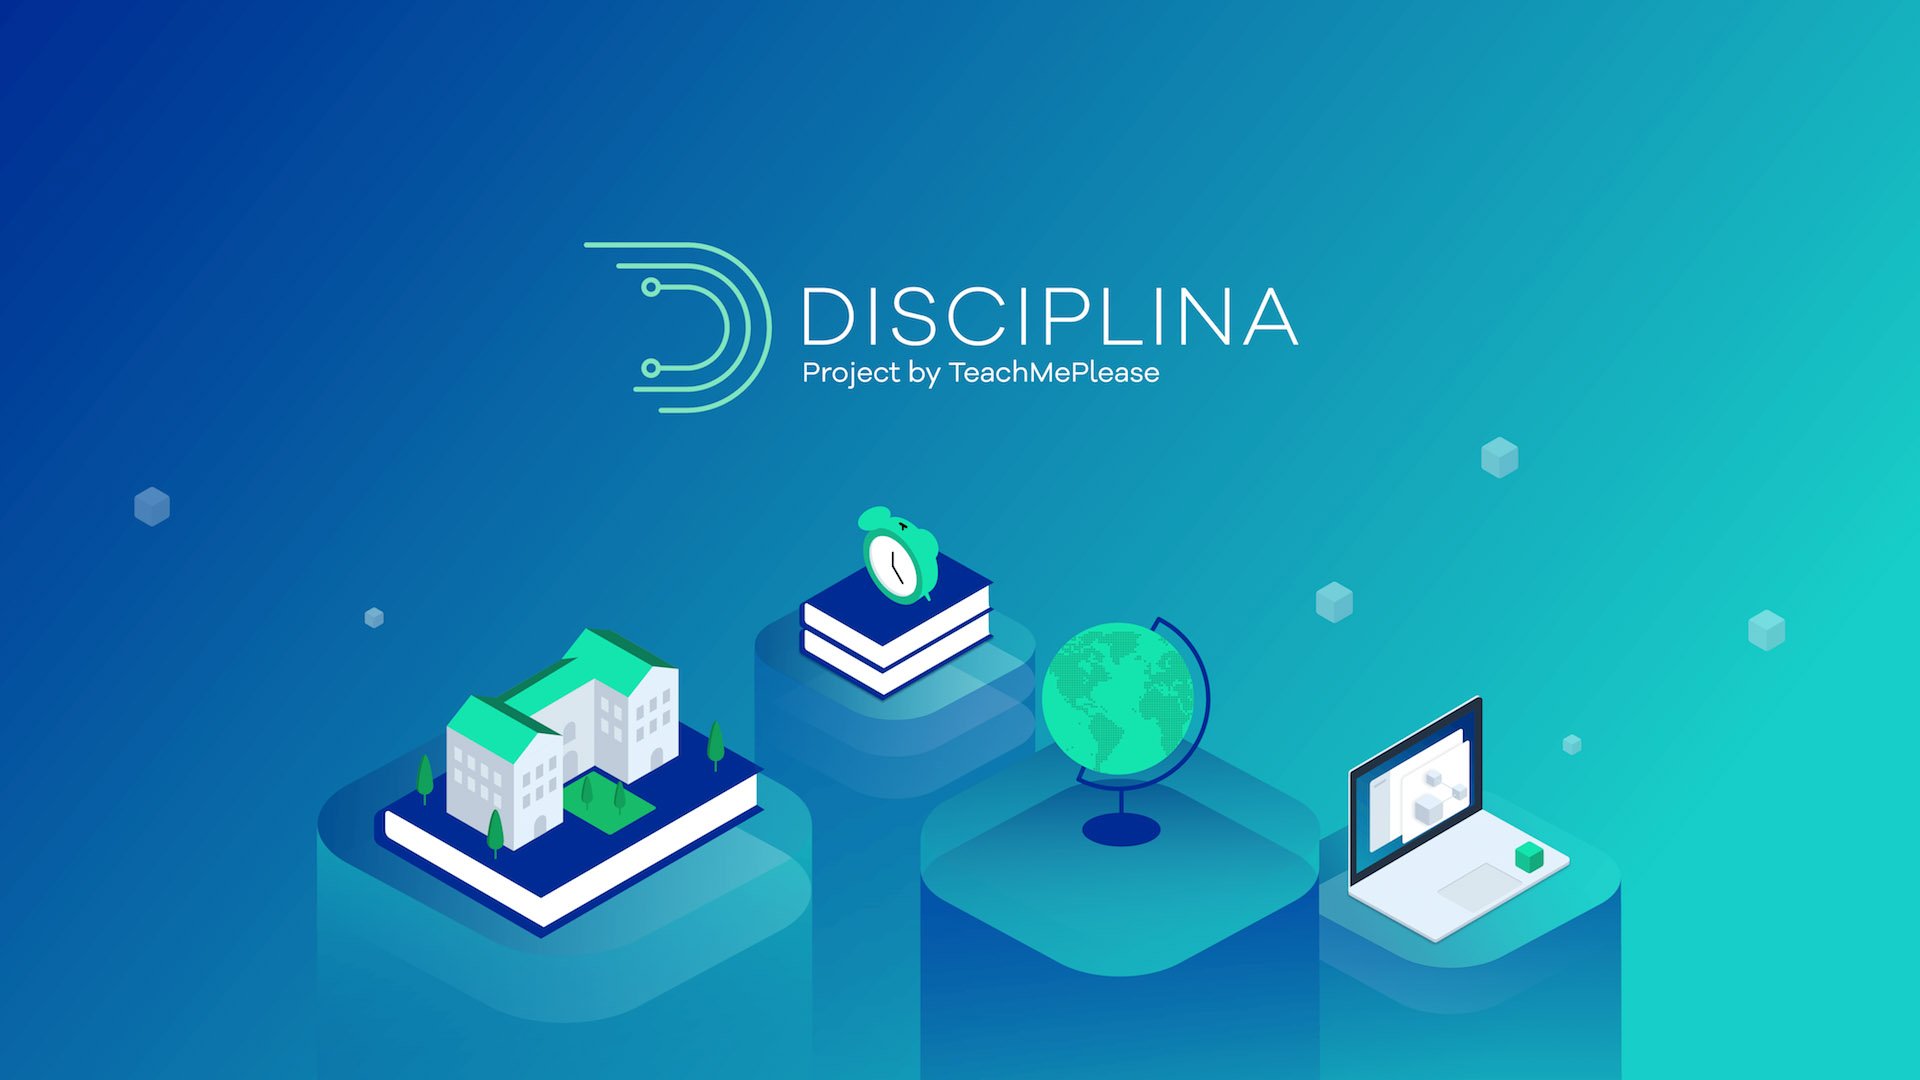 DISCIPLINA - First Blockchain for Recruiting and Education